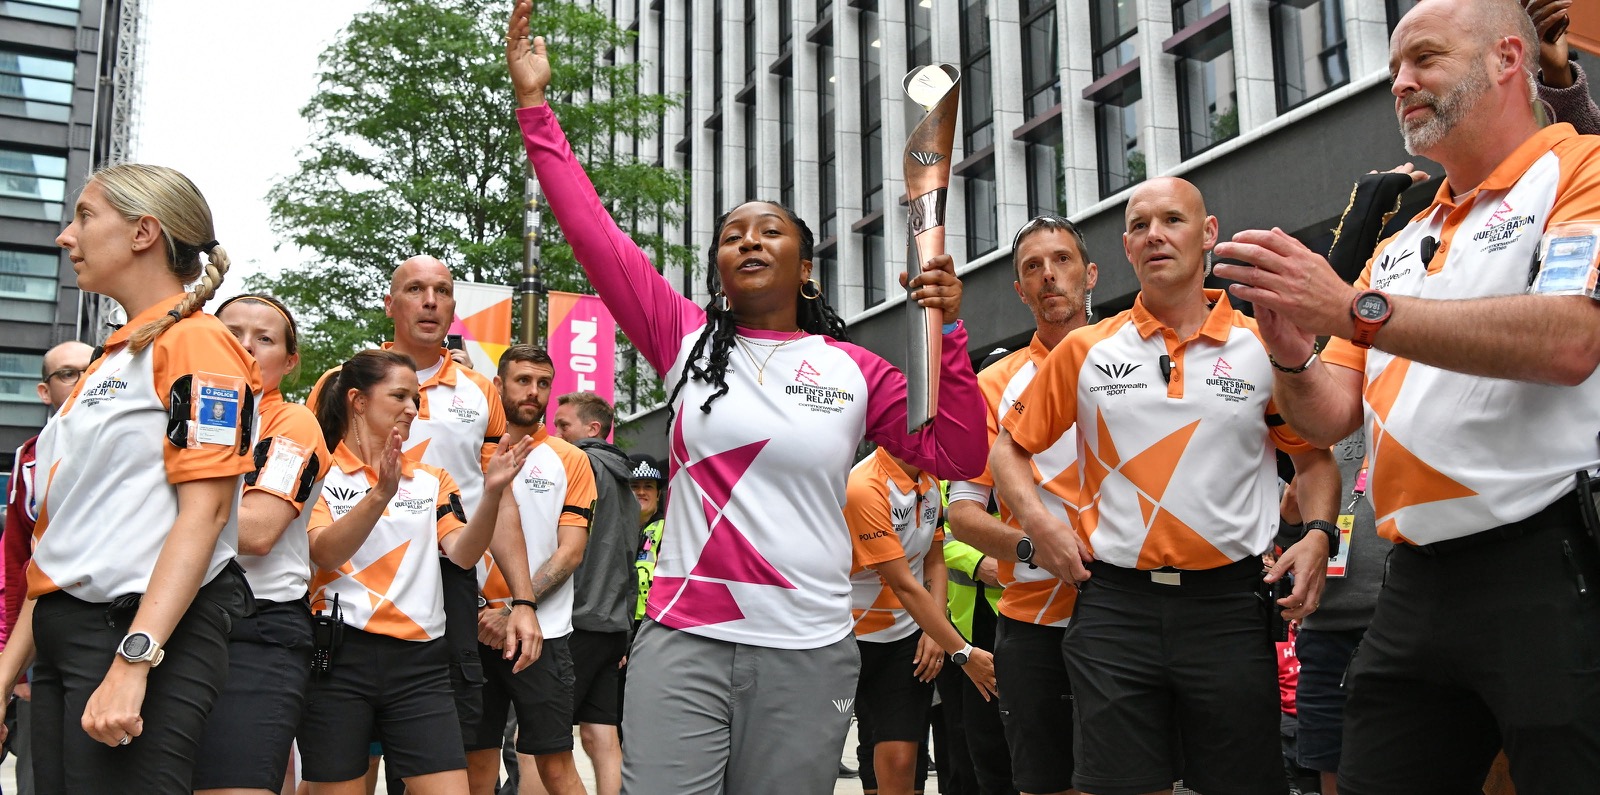 Sherelle Robbins carrying the Queens Baton through Paradise Birmingham before the start of the 2022 Commonwealth Games. She is surrounded by security runners and the public.